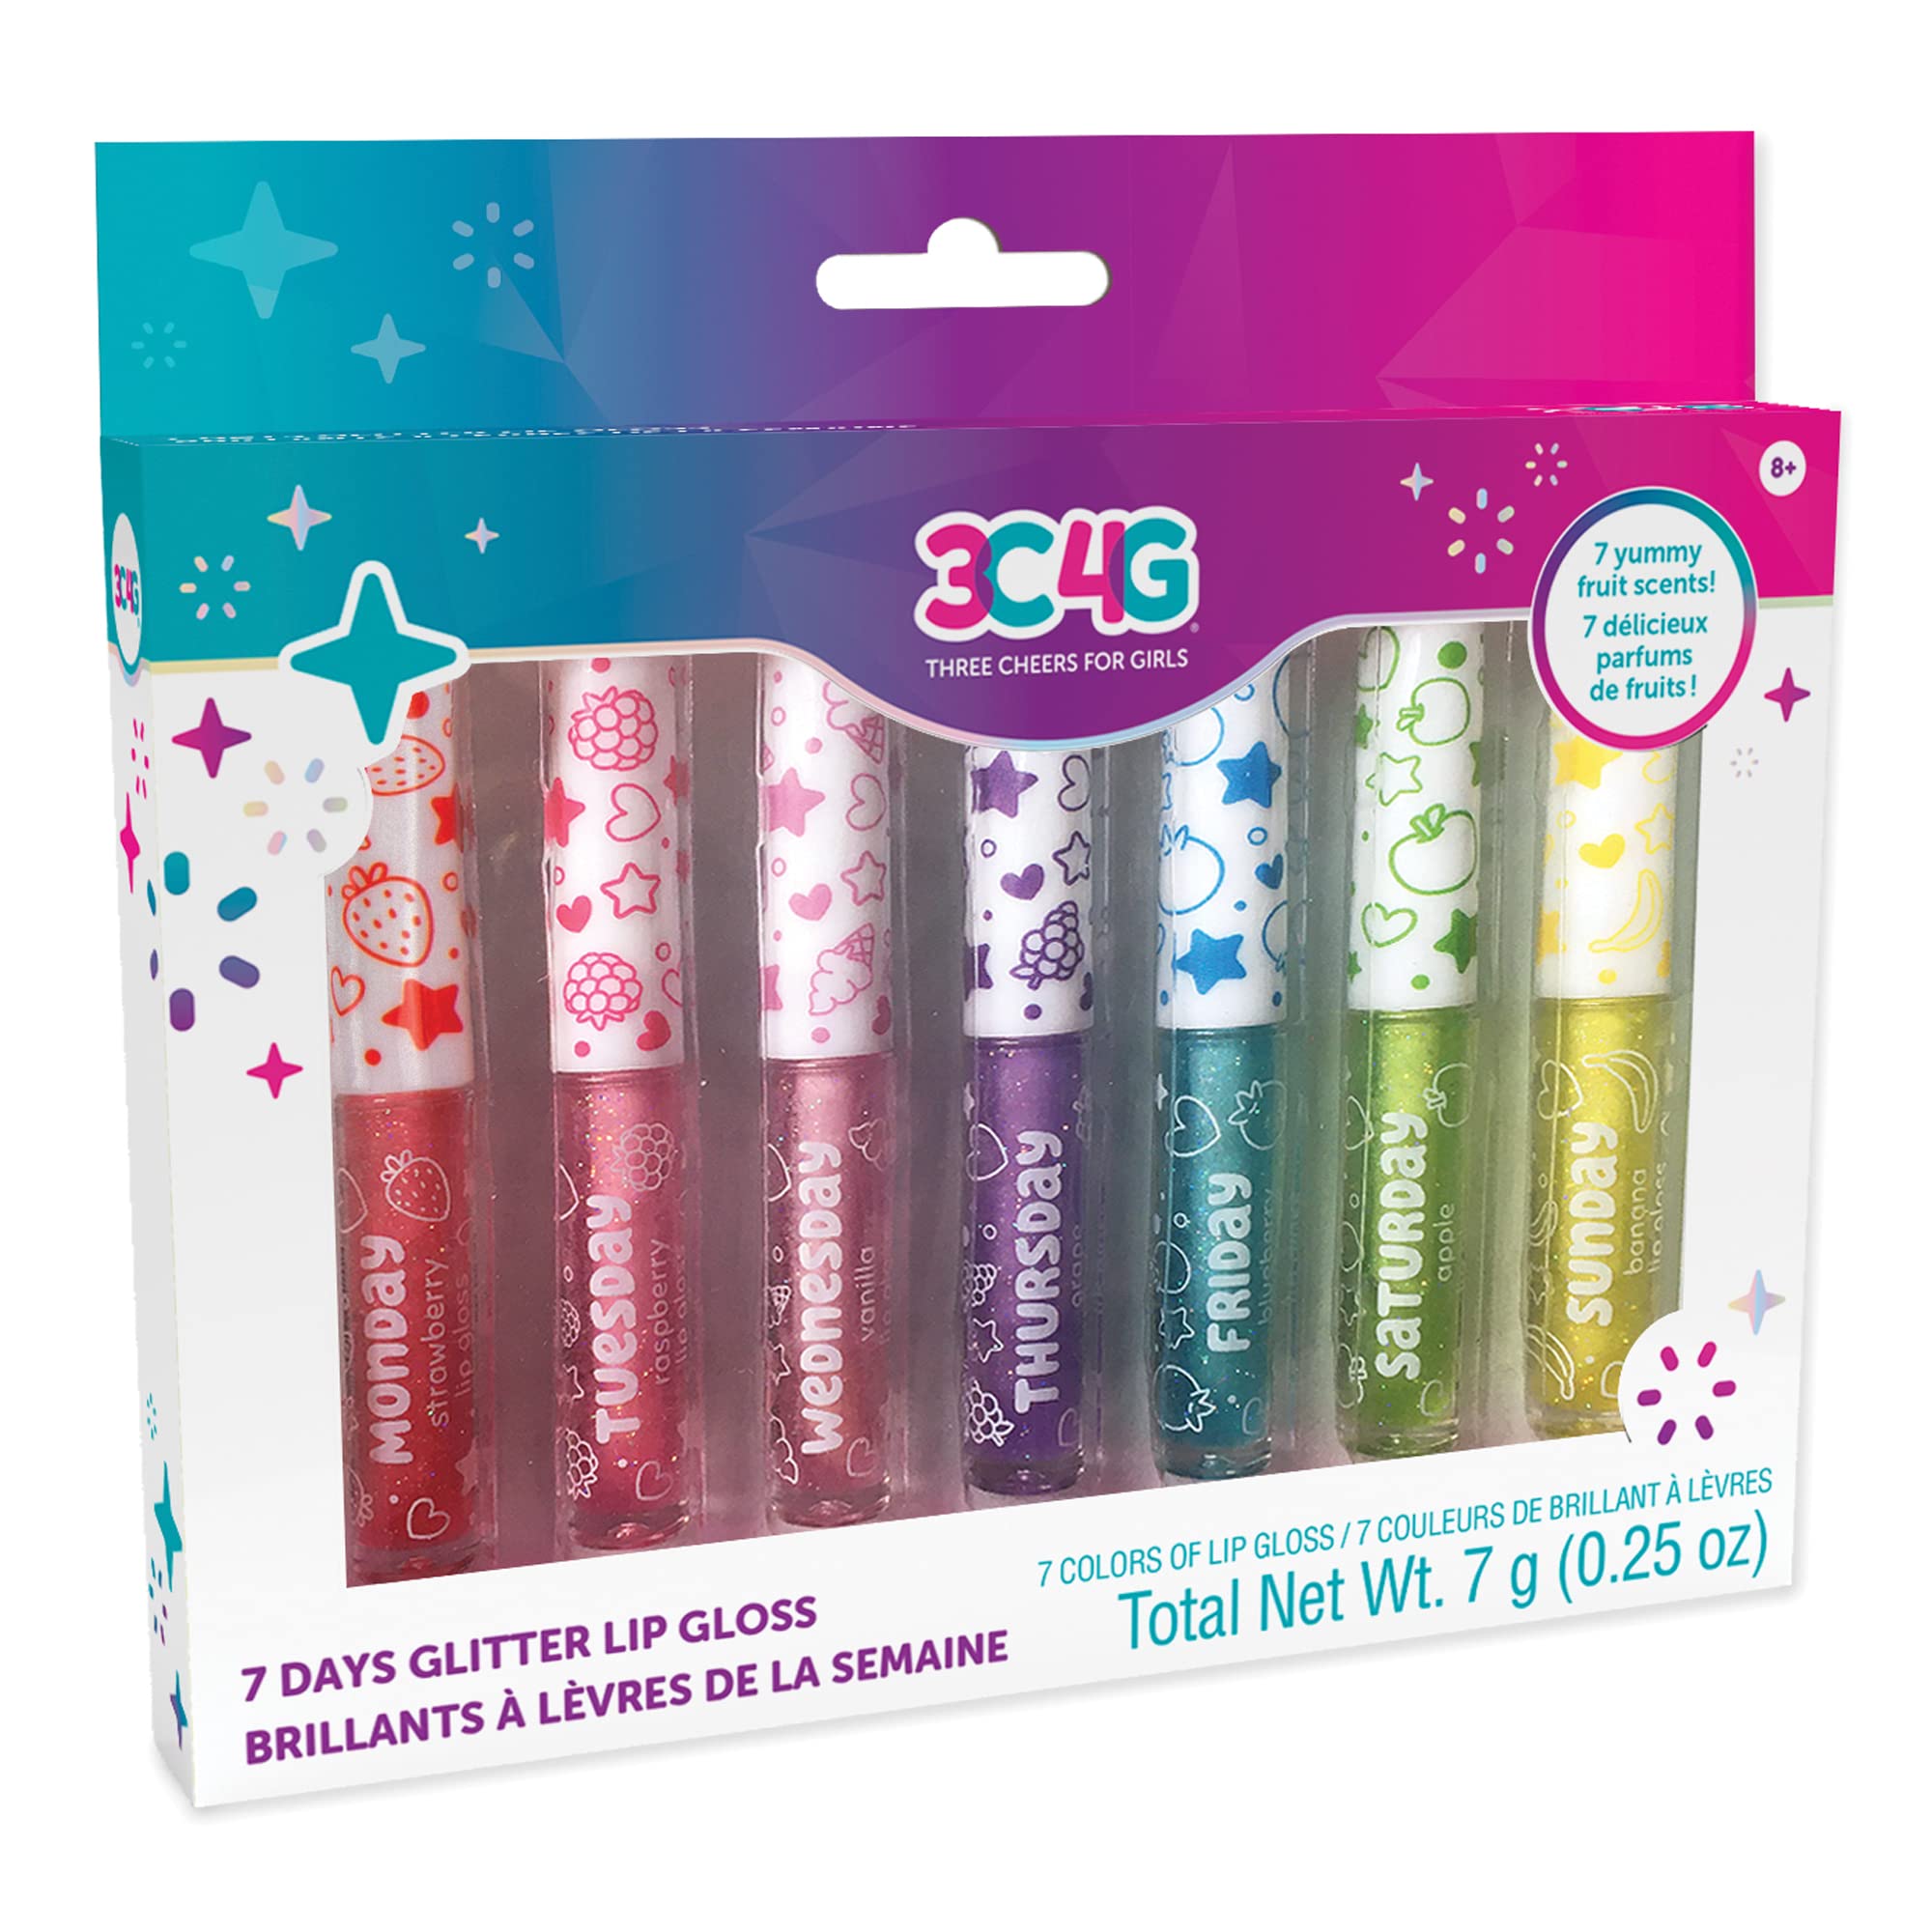 Three Cheers for Girls by Make It Real - 7 Days Glitter Lip Gloss -  Flavored Lip Gloss Set for Girls - Strawberry Raspberry Vanilla and More! -  7 Piece Lip Gloss Kit